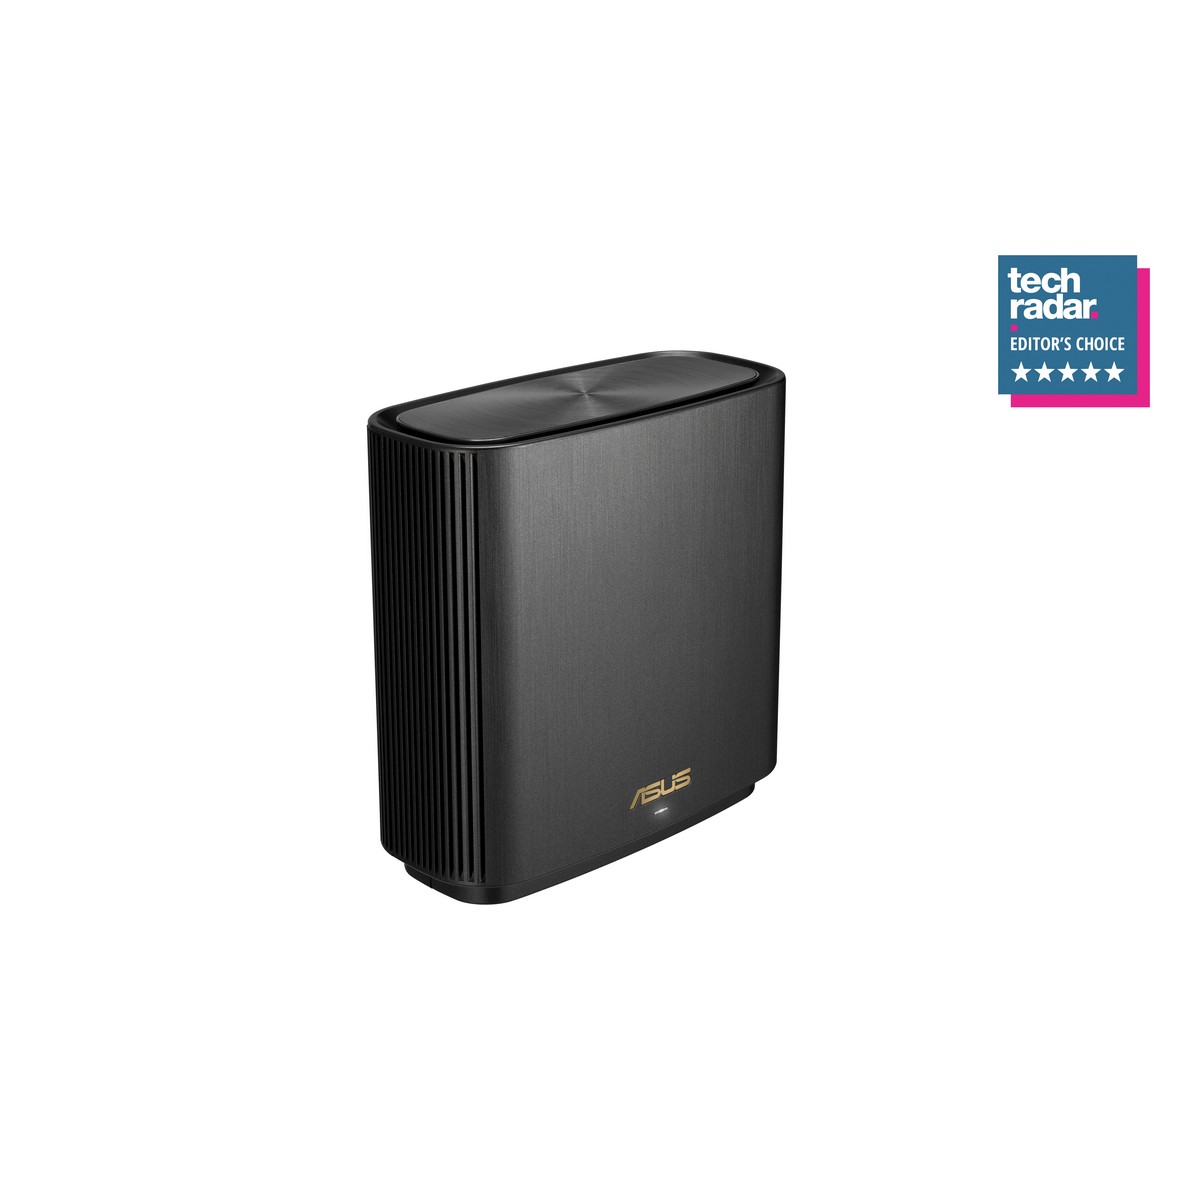 Asus - ASUS ZenWifi AX (XT8) AX6600 WiFi 6 Mesh System Pack of 1 - Black